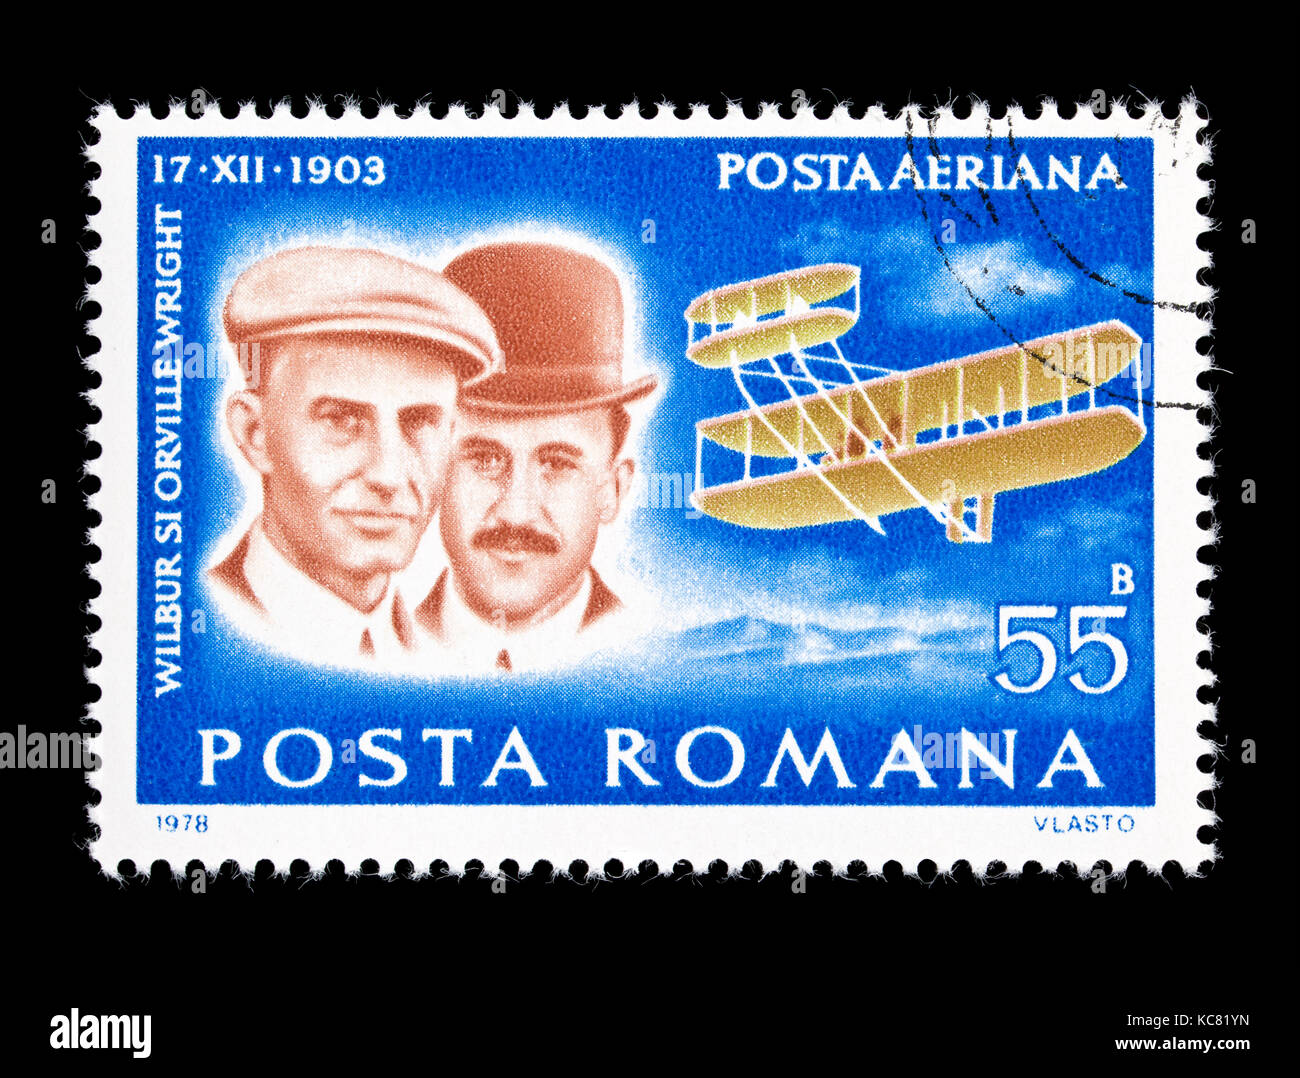 Postage stamp from Romania depicting Wilbur and Orville Wright and their Flyer A airplane. Stock Photo